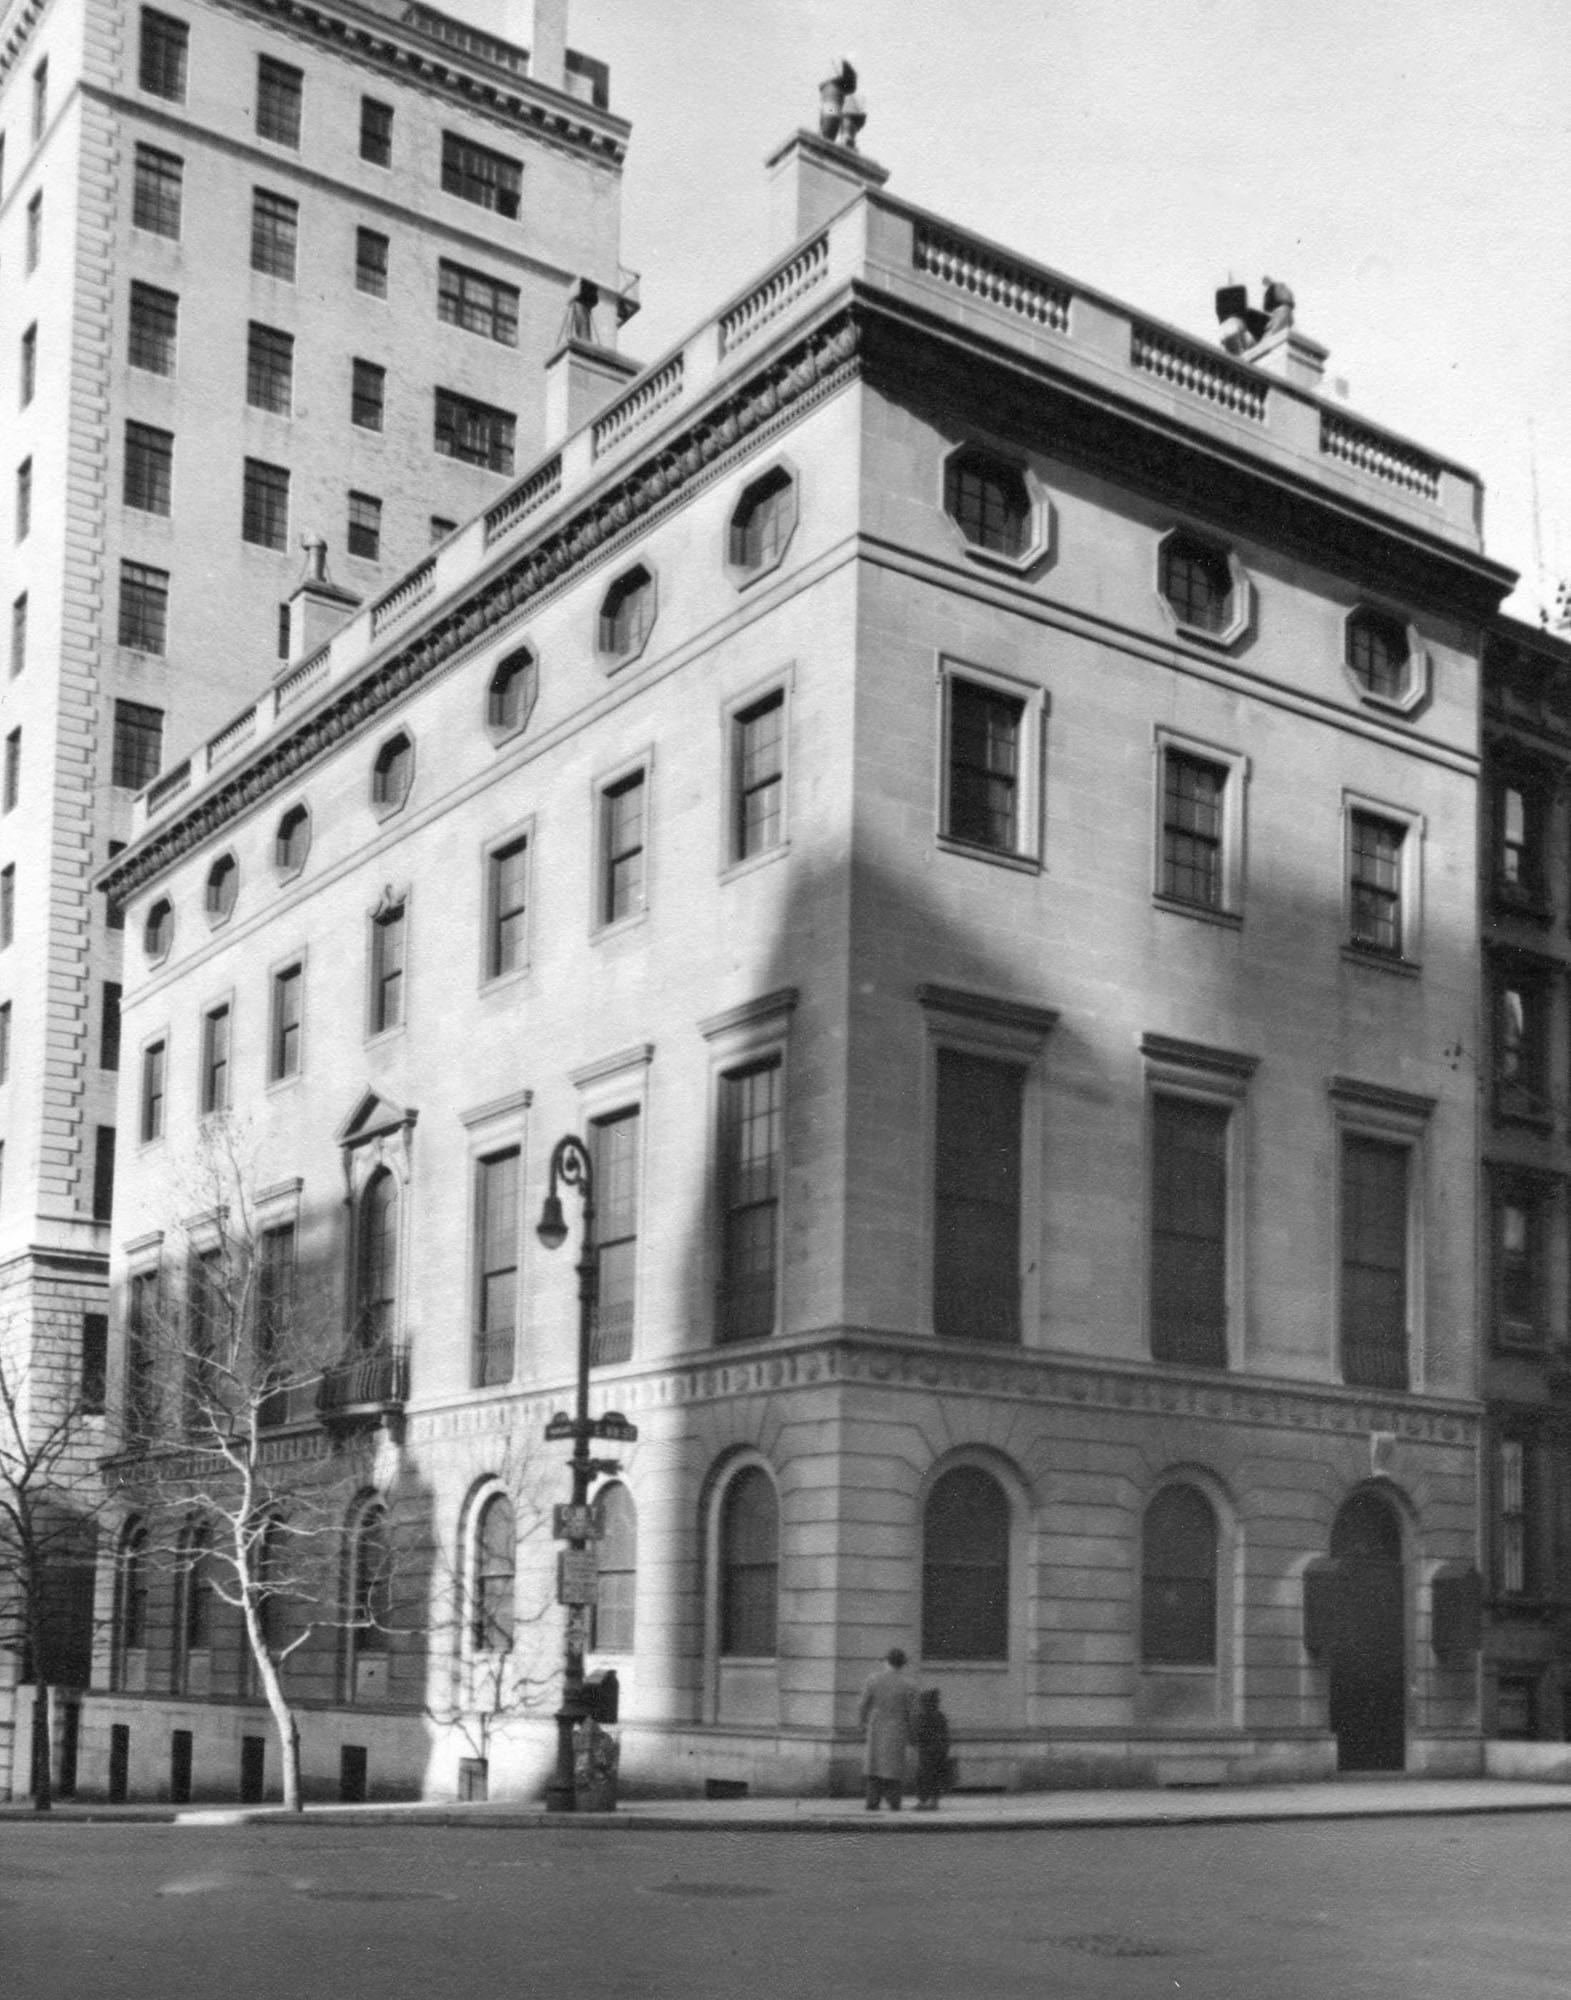 Harold Pratt House opens as CFR headquarters on 68th Street and Park Avenue in New York, NY